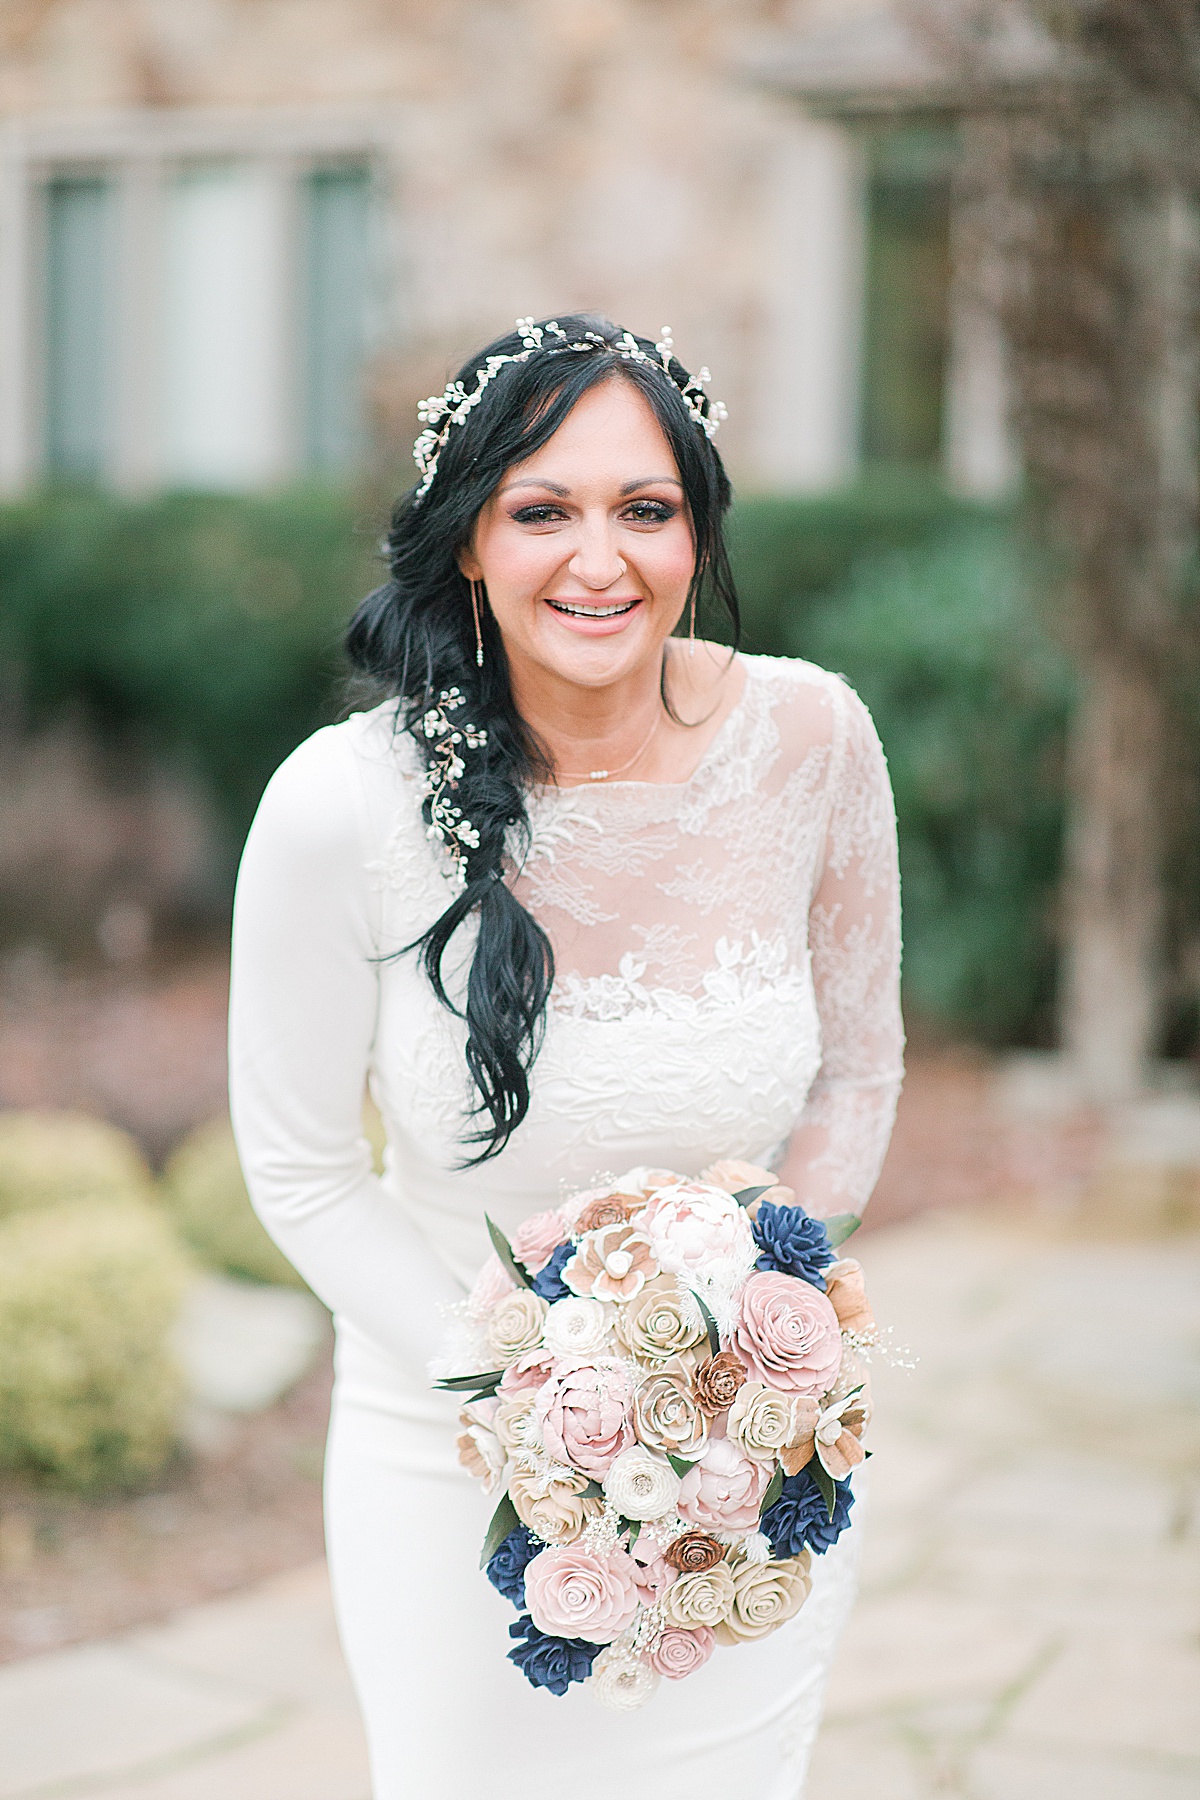 Bride Laughing at Camera Holding Bouquet Photo